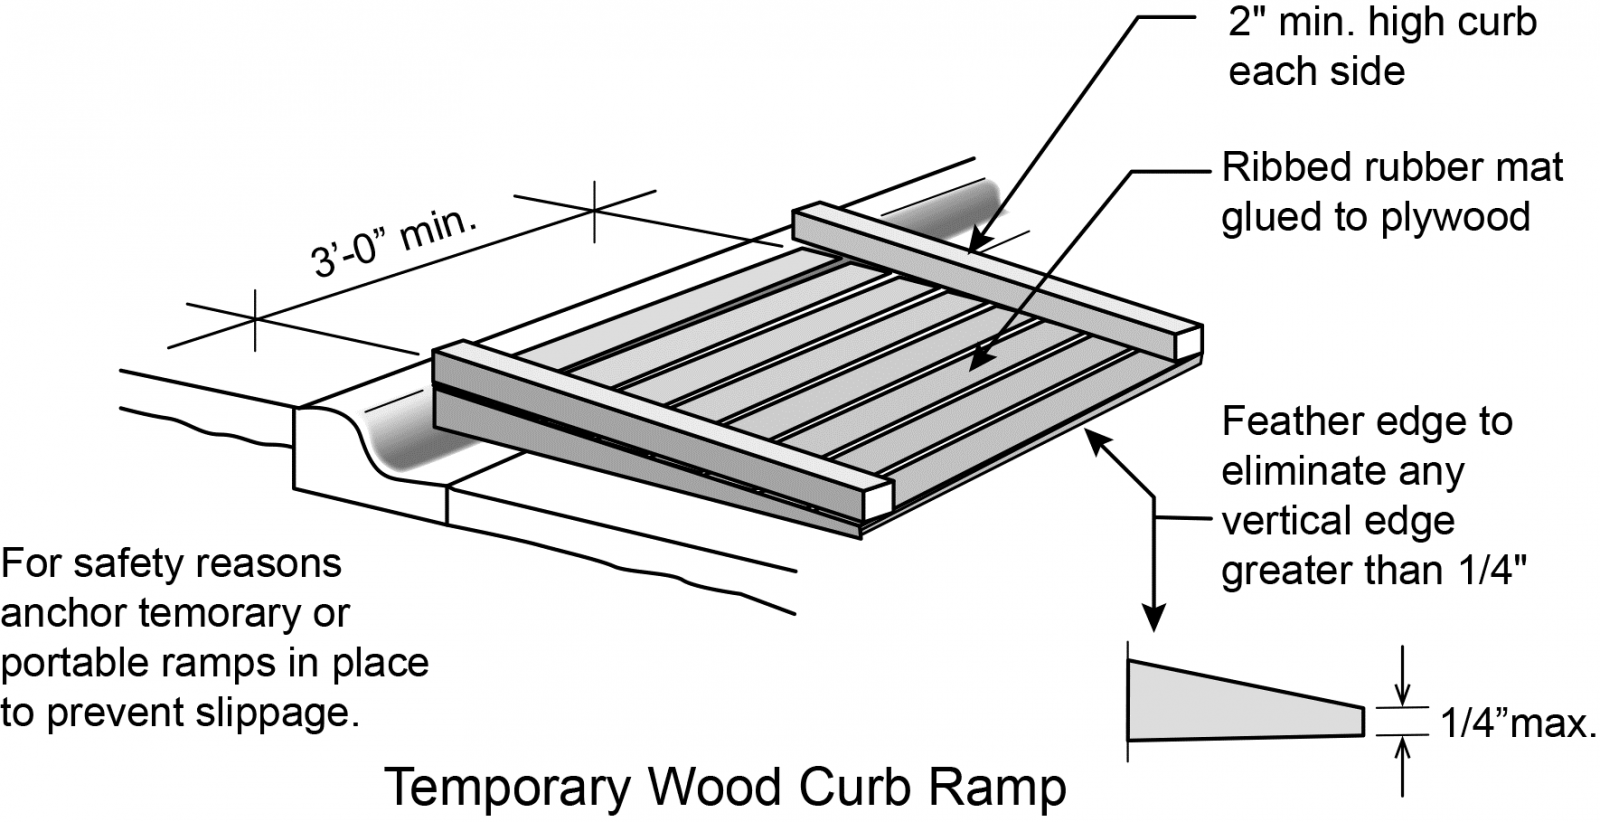 Figure 4: Temporary wood ramp is anchored in place against curb to prevent slippage. Edge guards are a minimum of 2 inches high on each side. Ribbed bummer mat is glued to the plywood ramp. Feather edges to eliminate any vertical edge great than ¼ inch